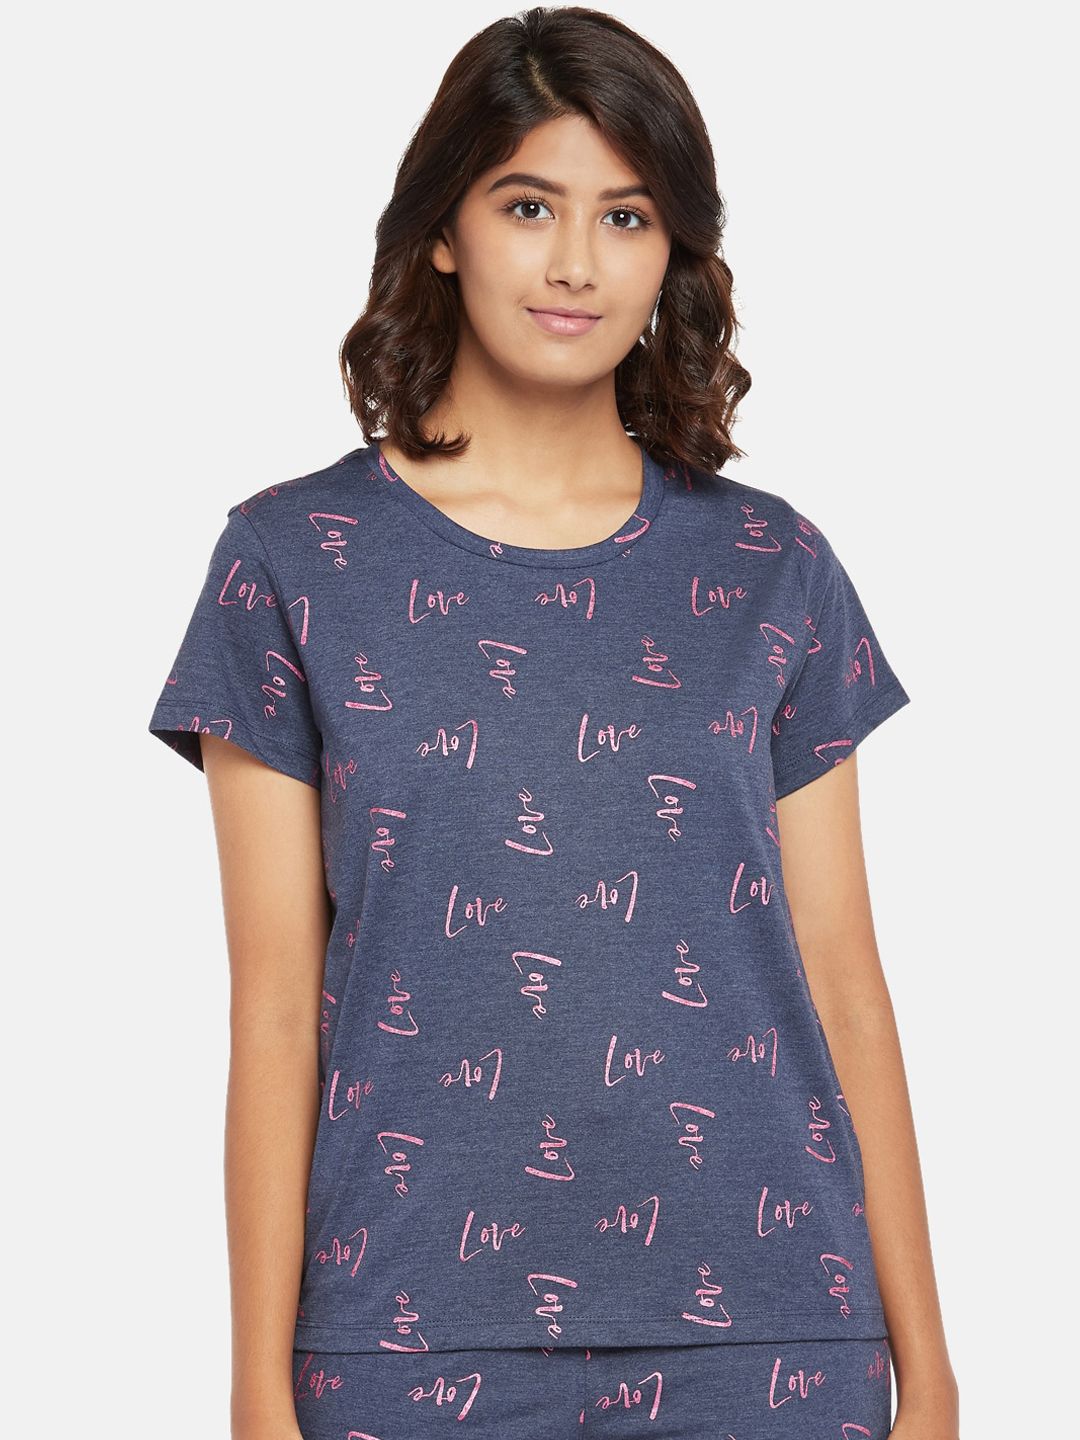 Dreamz by Pantaloons Navy Blue Printed Pure Cotton Regular Lounge tshirt Price in India